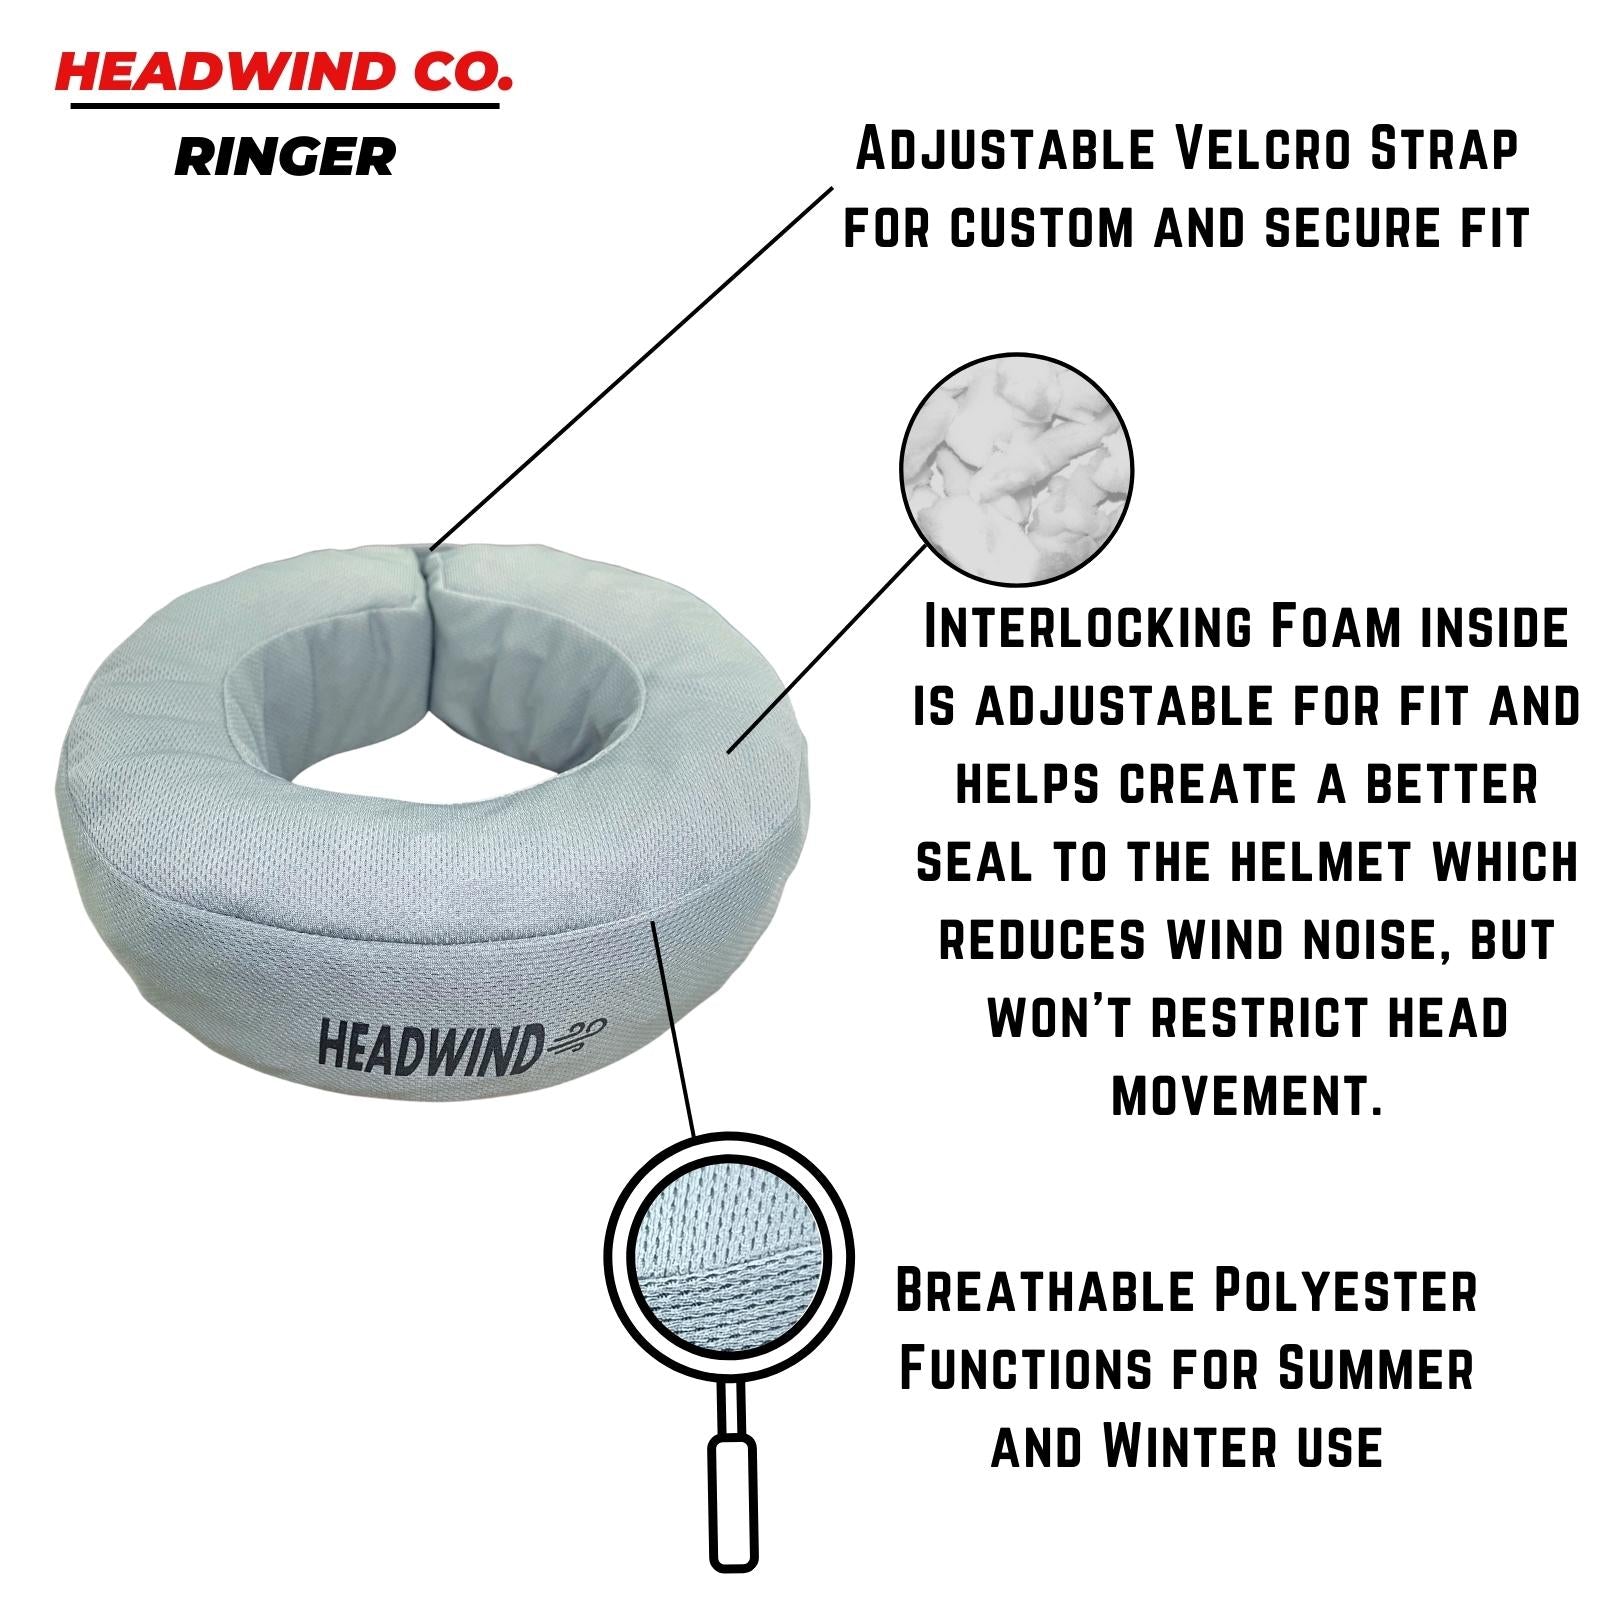 Neck ring has adjustable velcro strap for a custom fit made with breathable polyester for winter and summer use